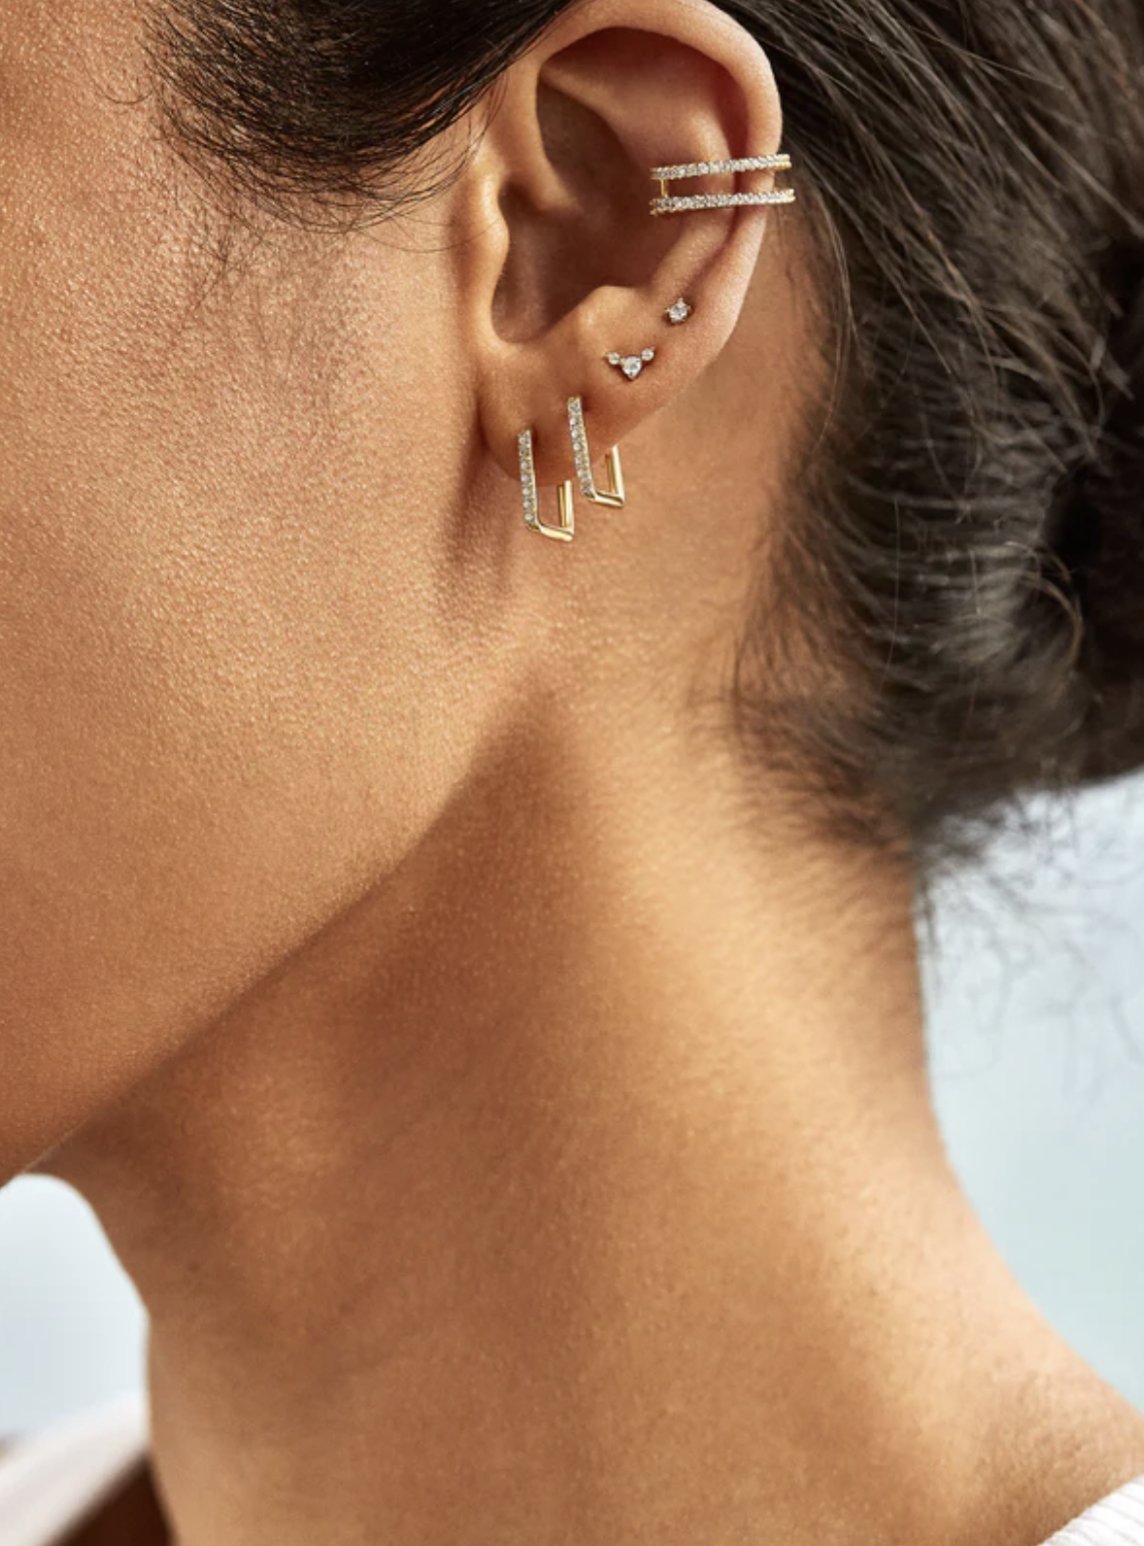 Ear cuffs and how wearing many earrings is trendy now — Marcia Crivorot